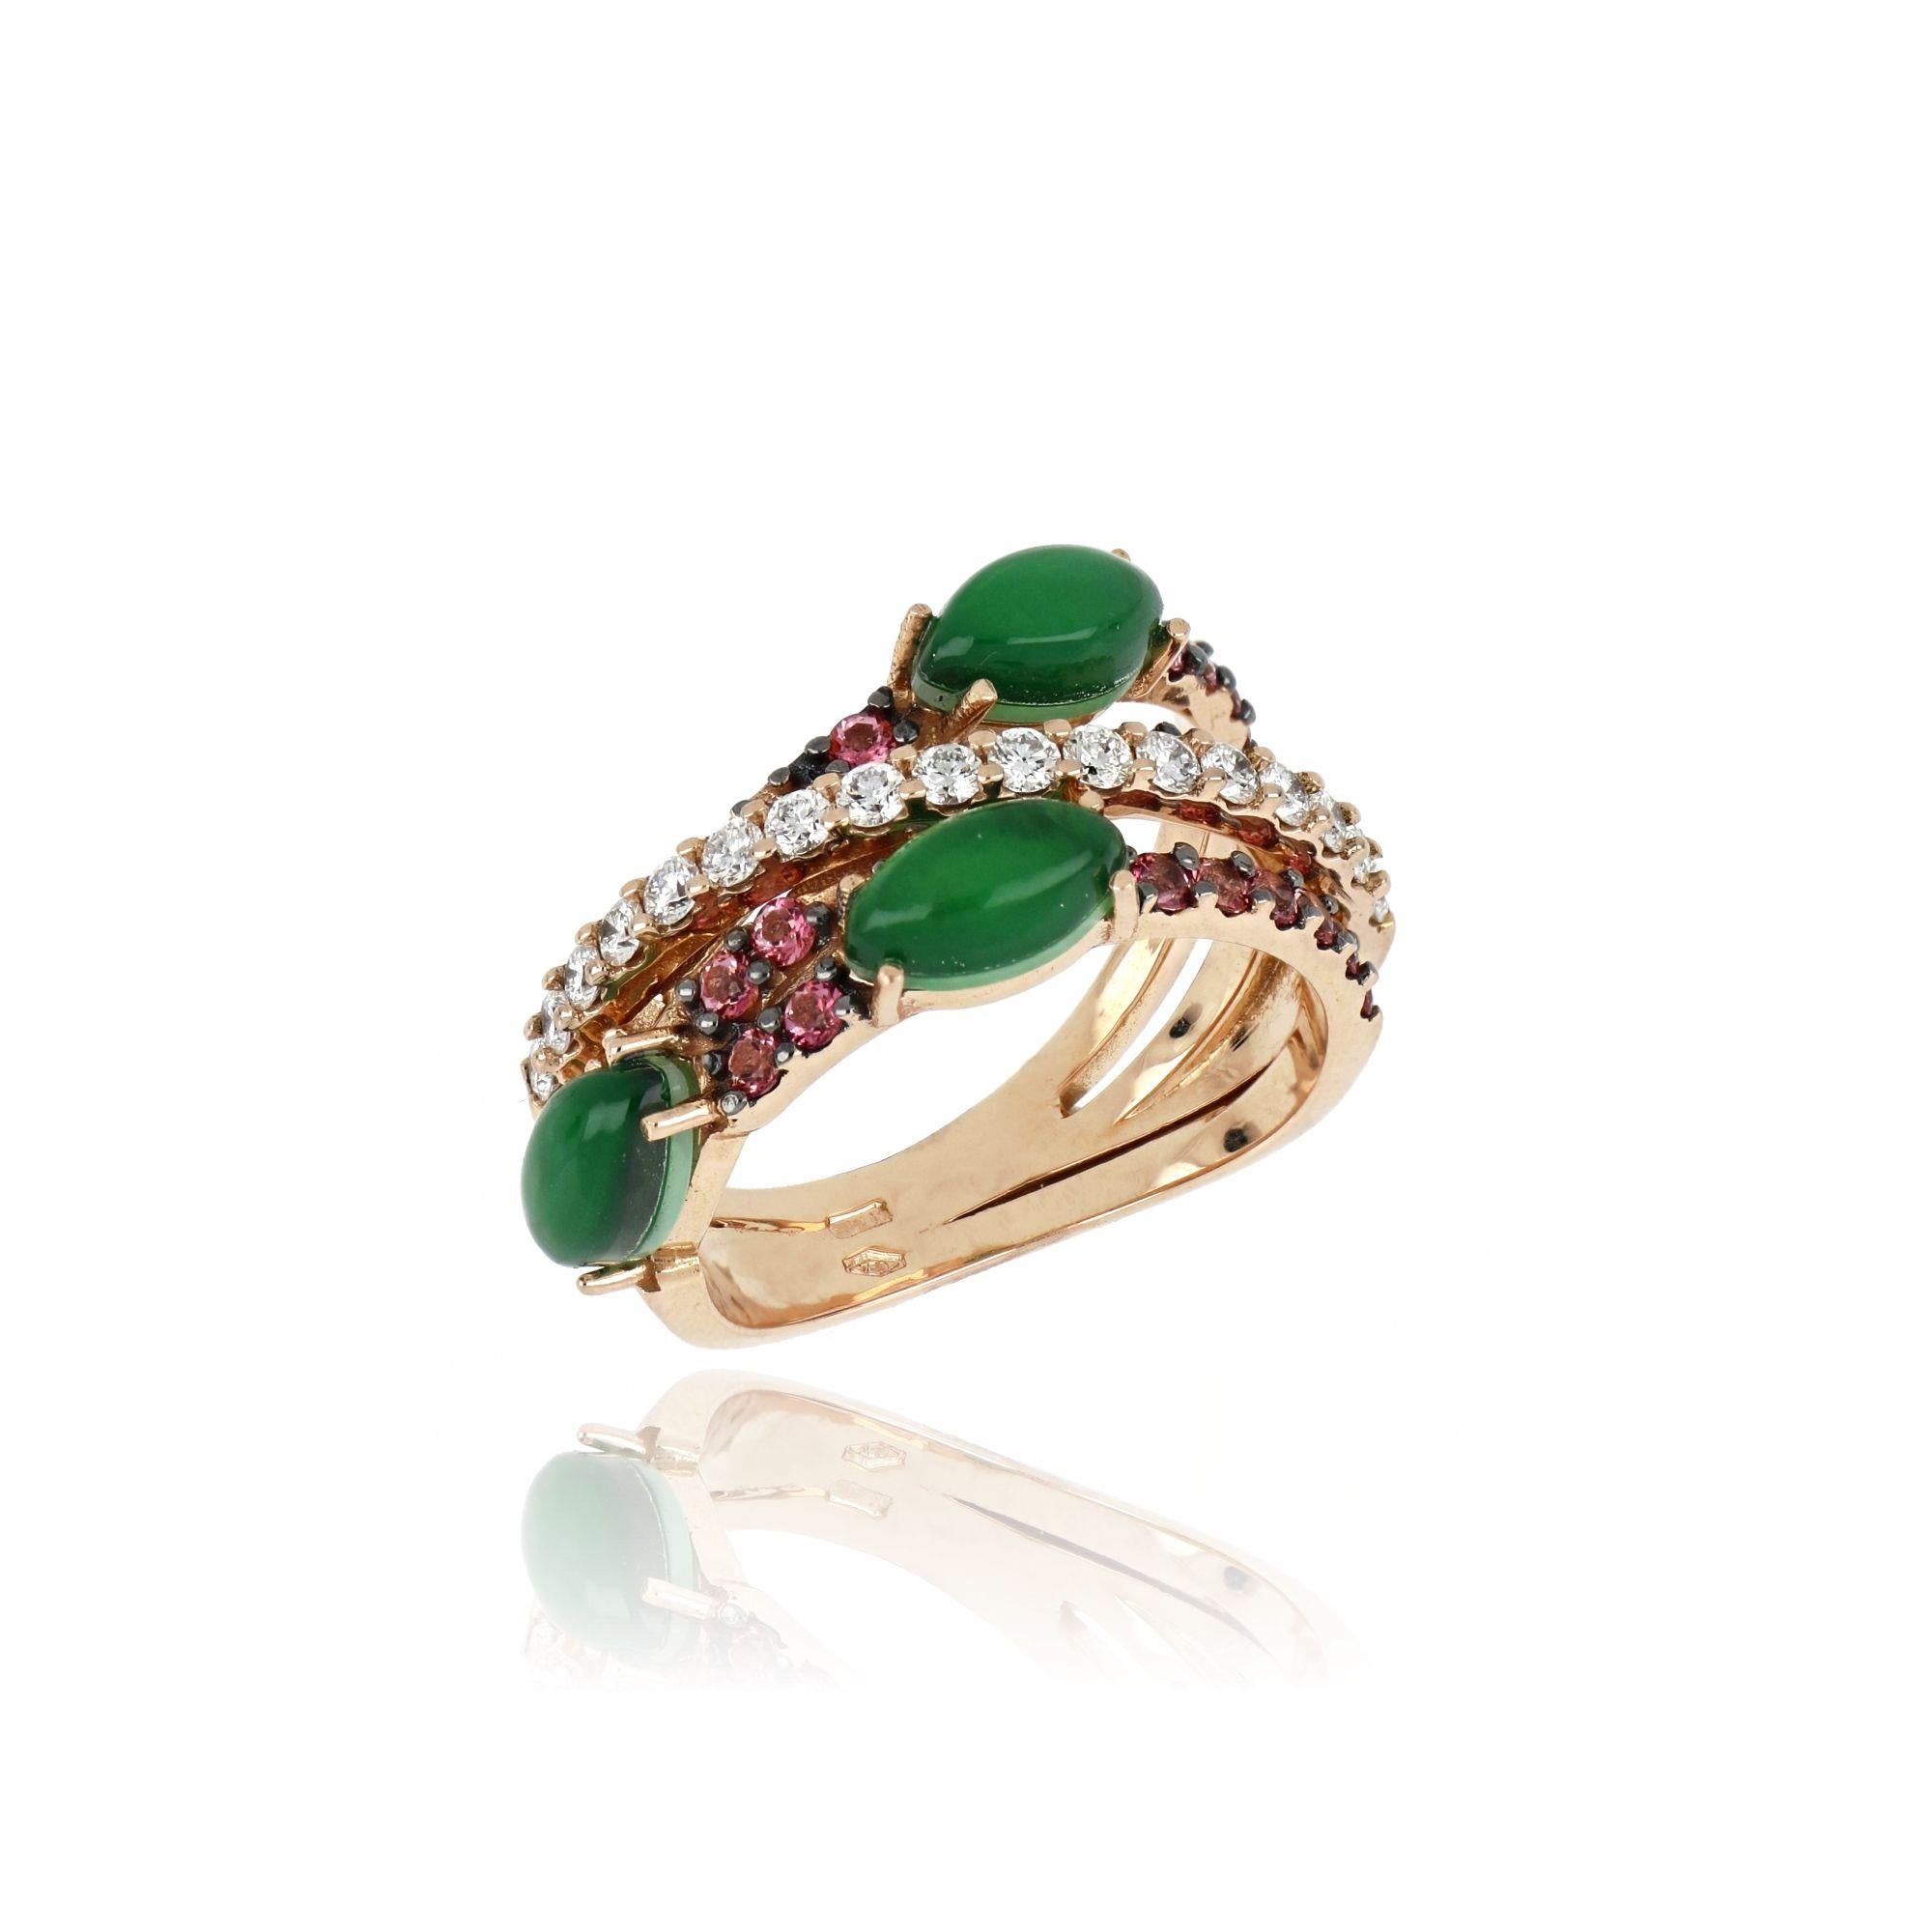 For Sale:  18kt Rose Gold Les Papillon Ring Green Aventurine, Pink Topazes and Diamonds 3